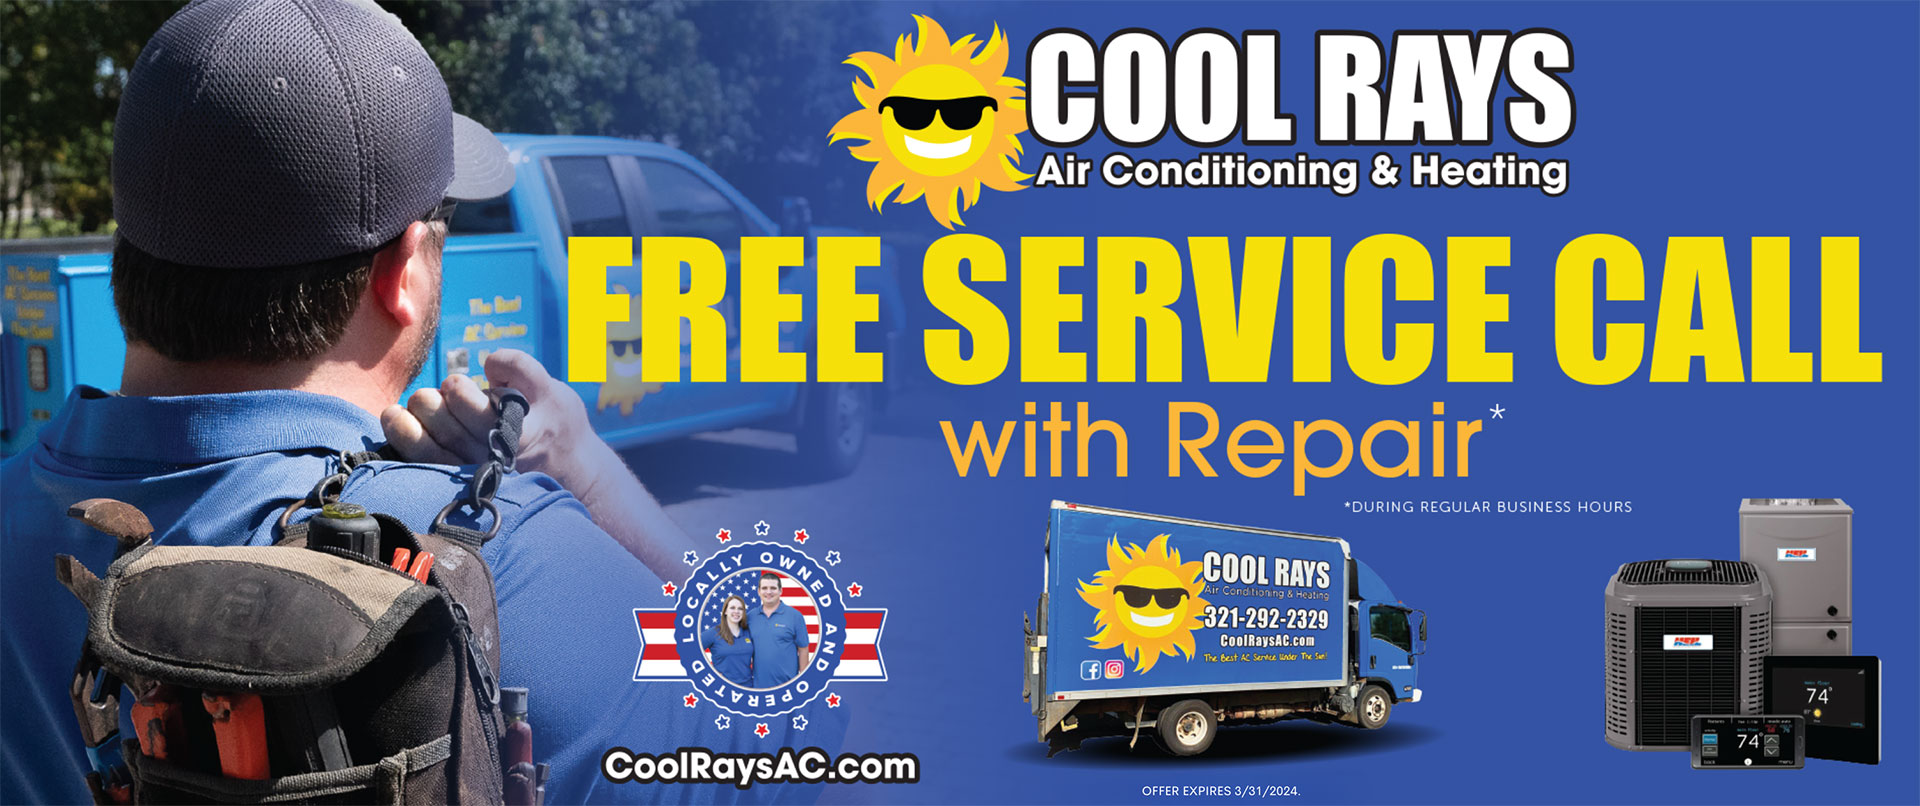 Cool Rays Free Service Call with Repair